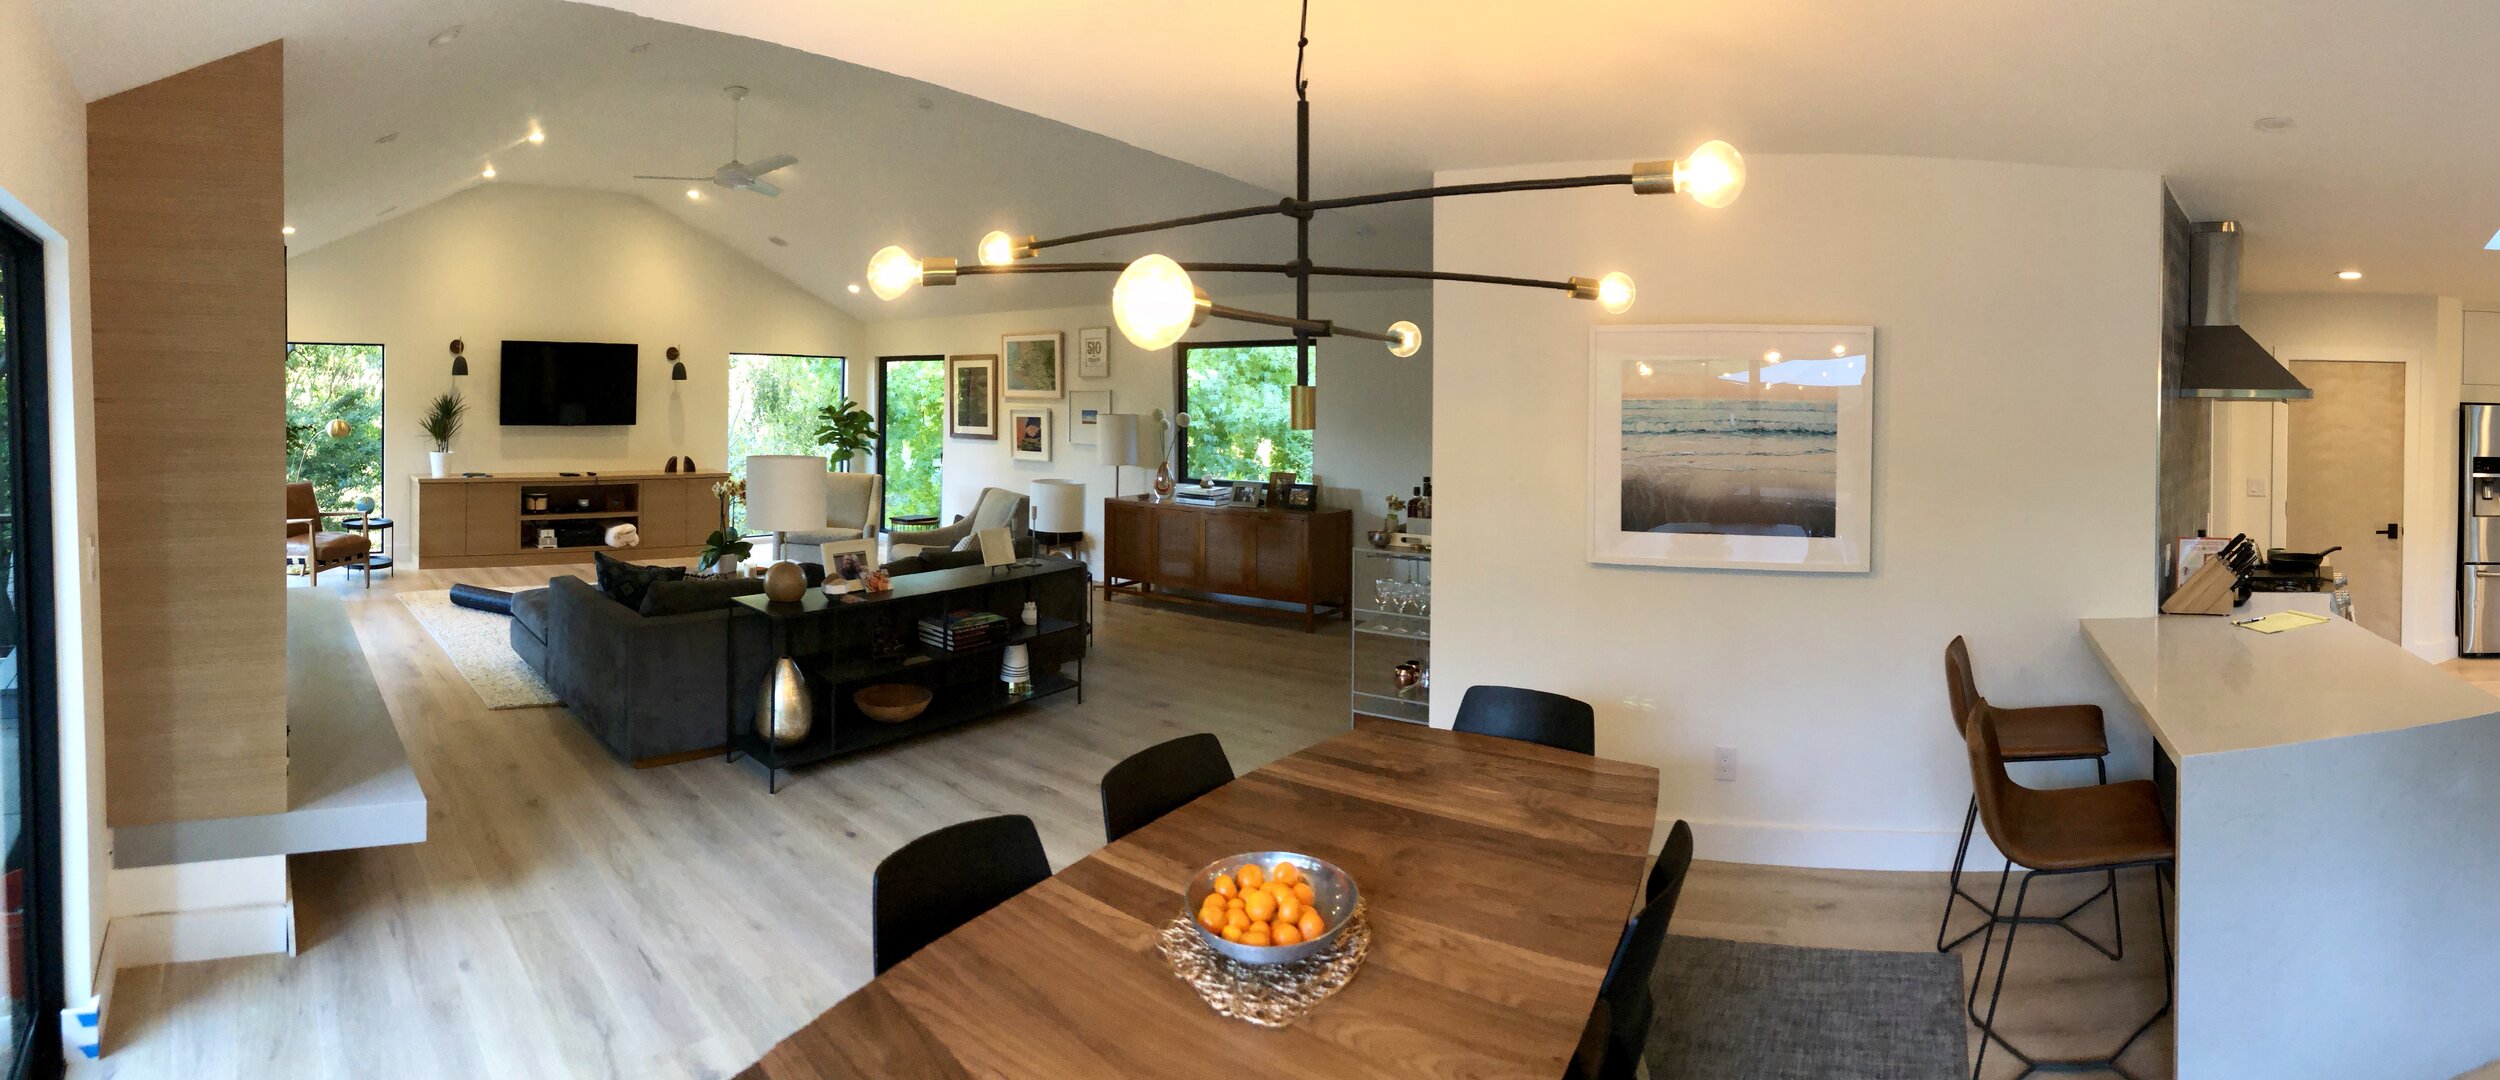 Addition/remodel in the Oakland Hills